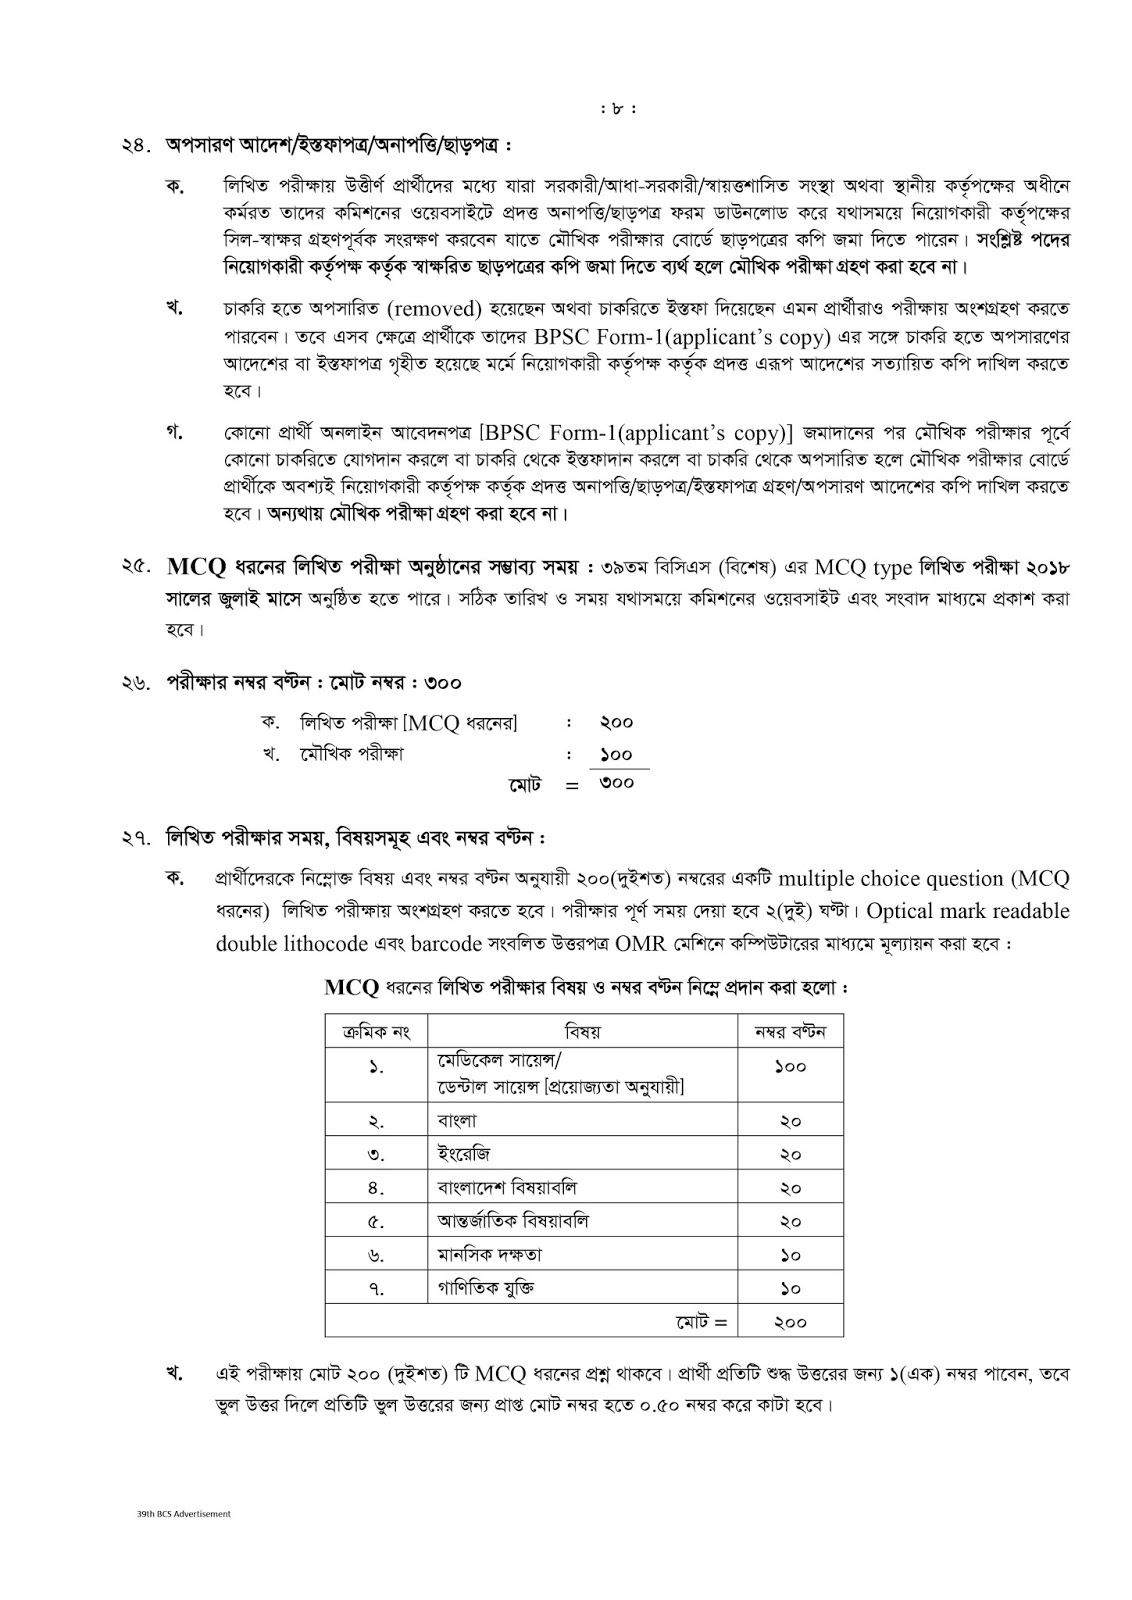  Bangladesh Public Service Commission (BPSC) health 39th Special doctor Recruitment Mark Distribution: